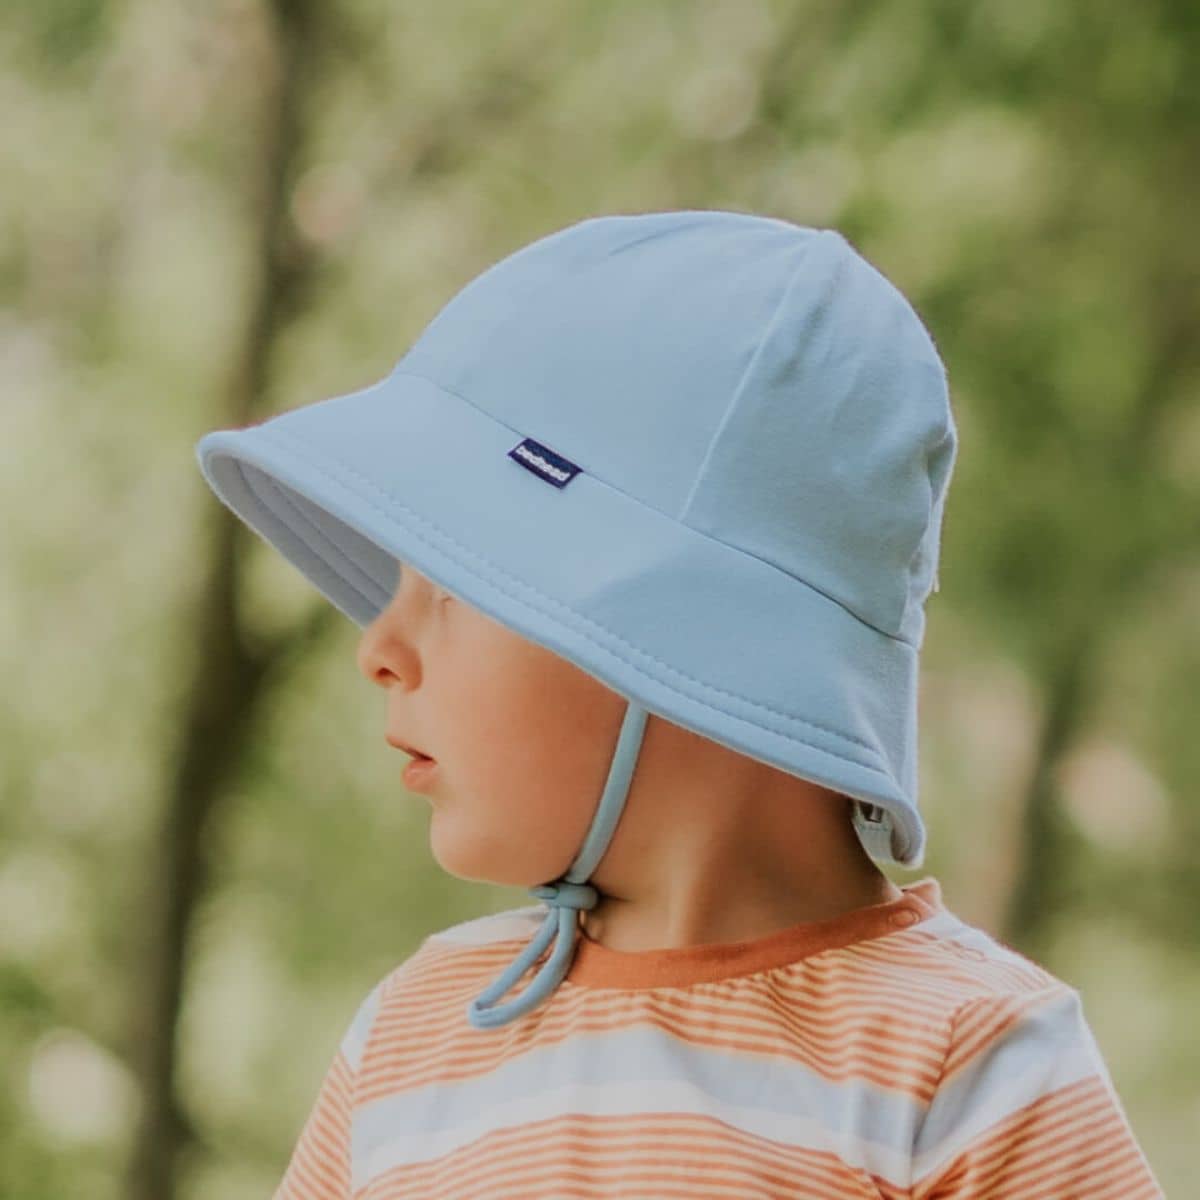 Bedhead Baby Bucket Hat with Strap - Chambray